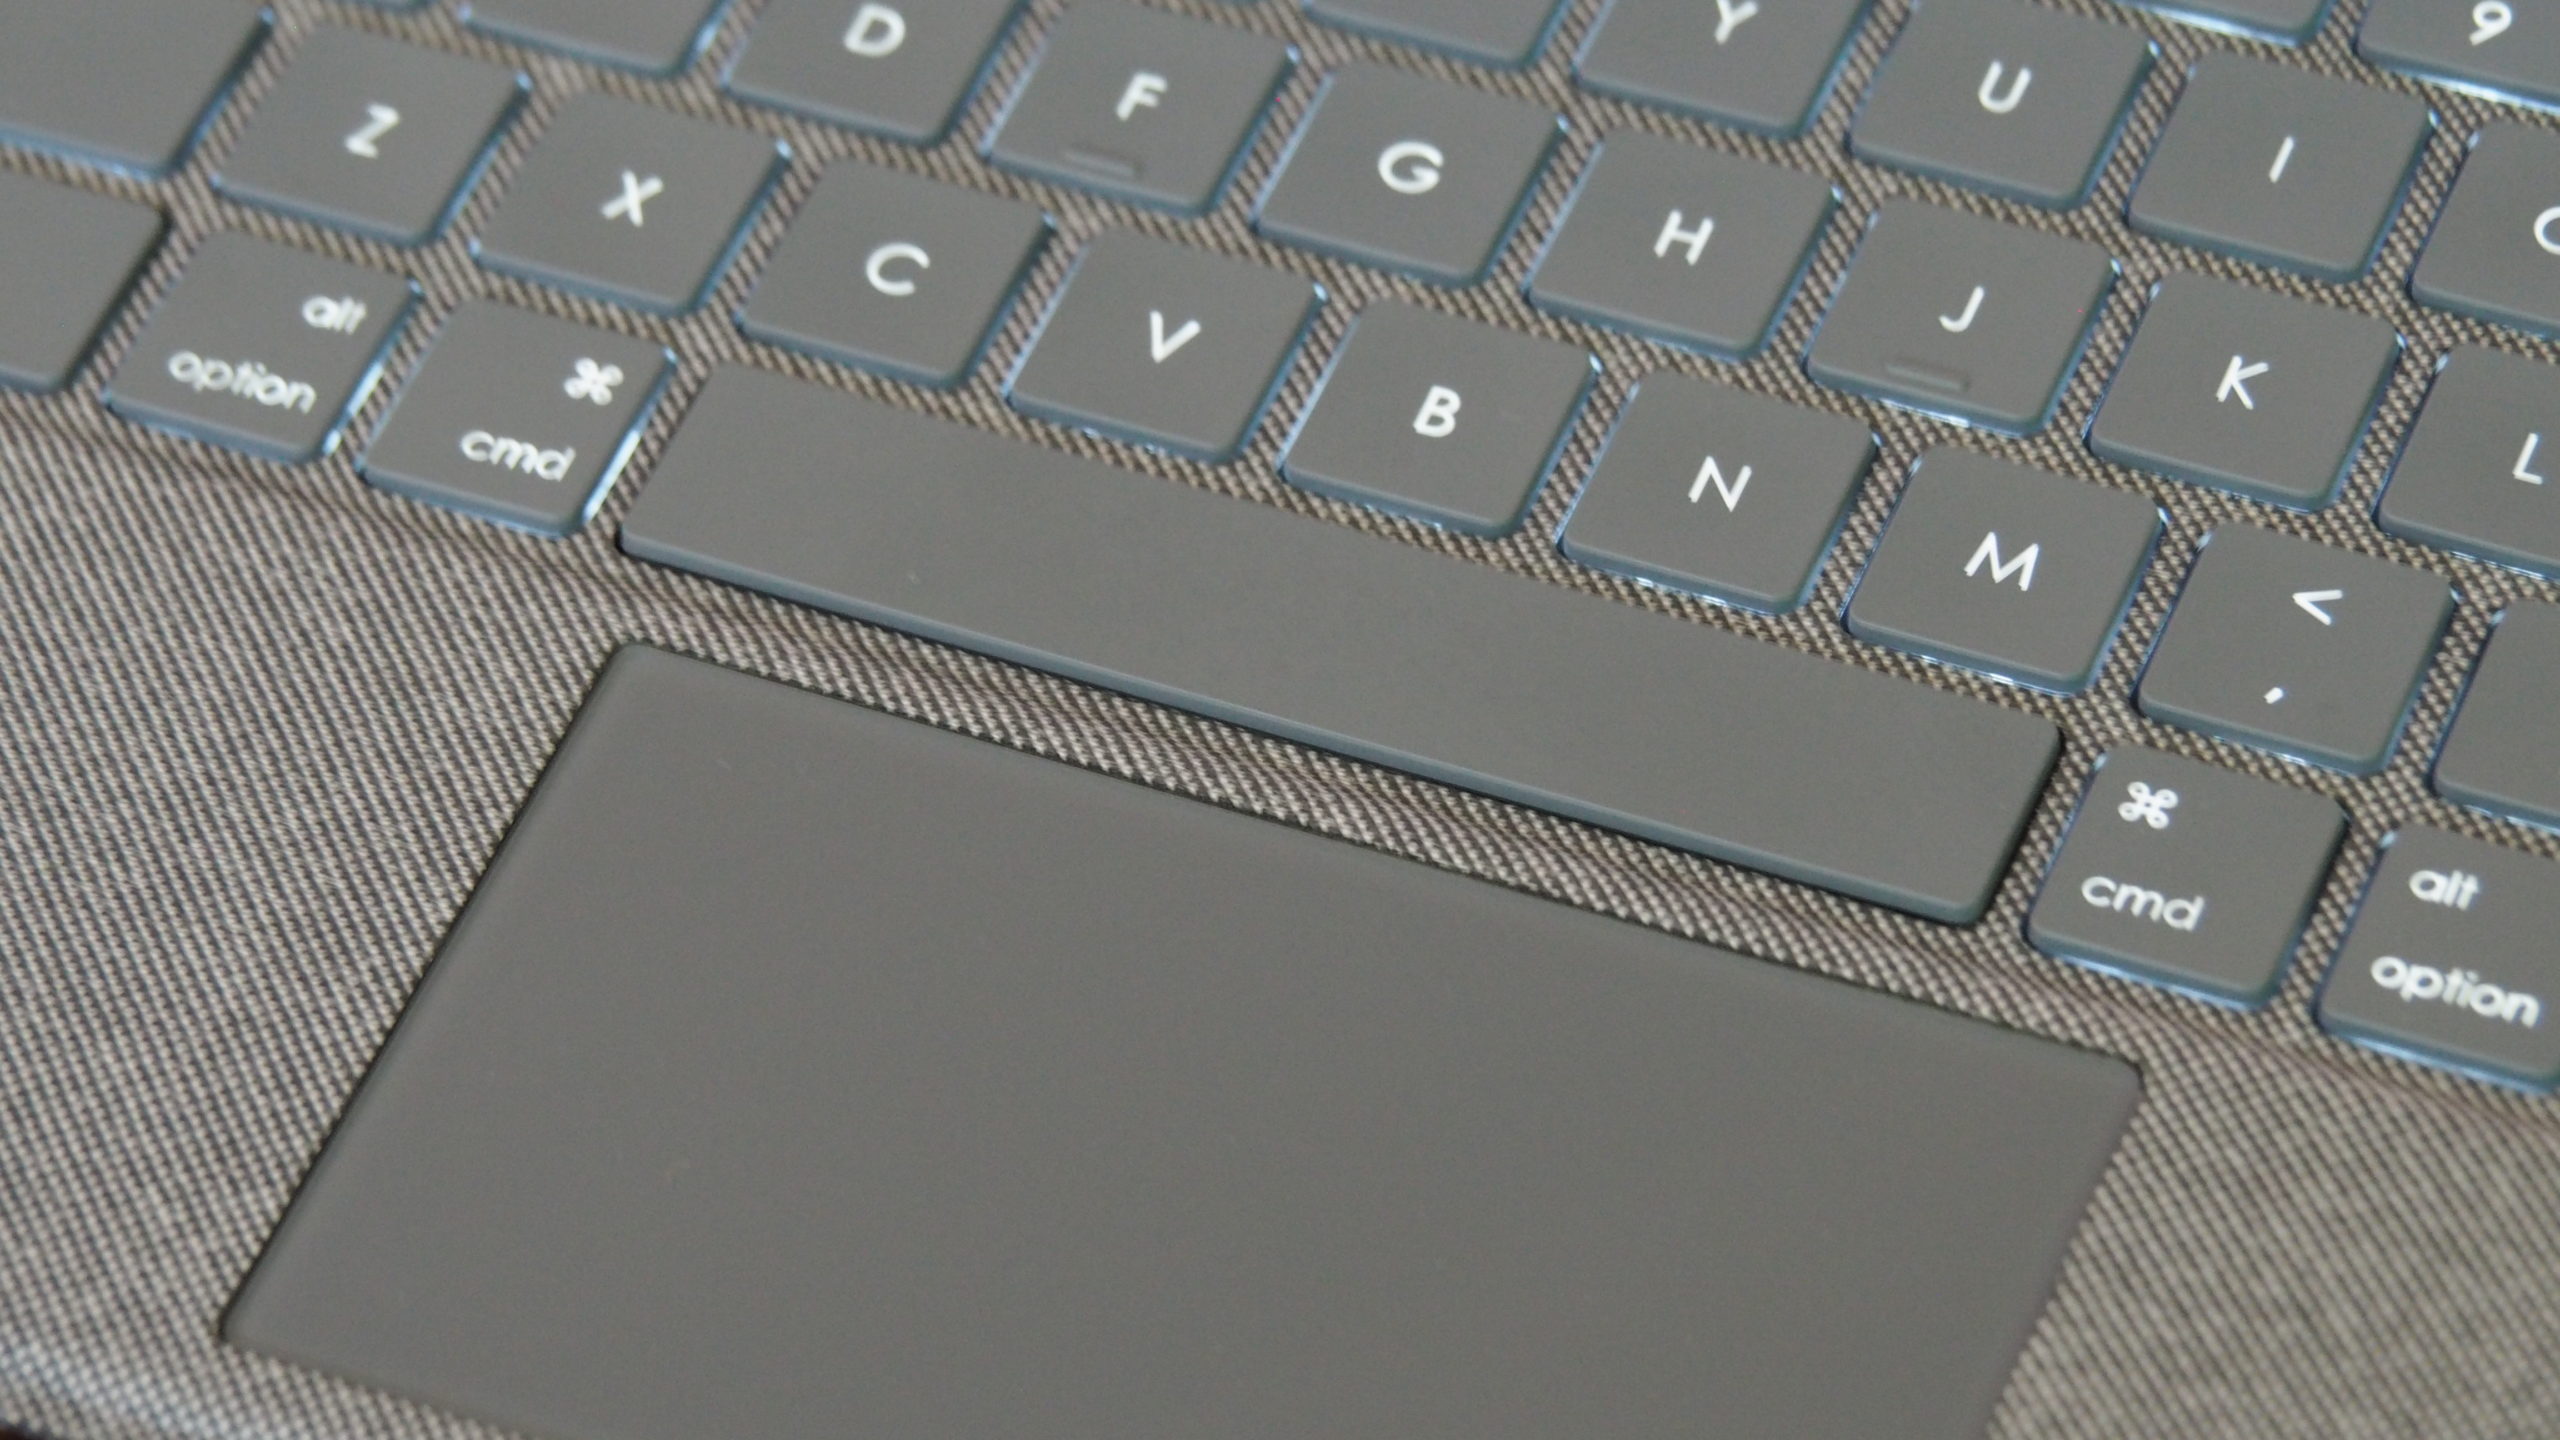 Typing on this keyboard is a dream, but the fabric starts to feel unpleasant after a while. (Photo: Caitlin McGarry, Gizmodo)